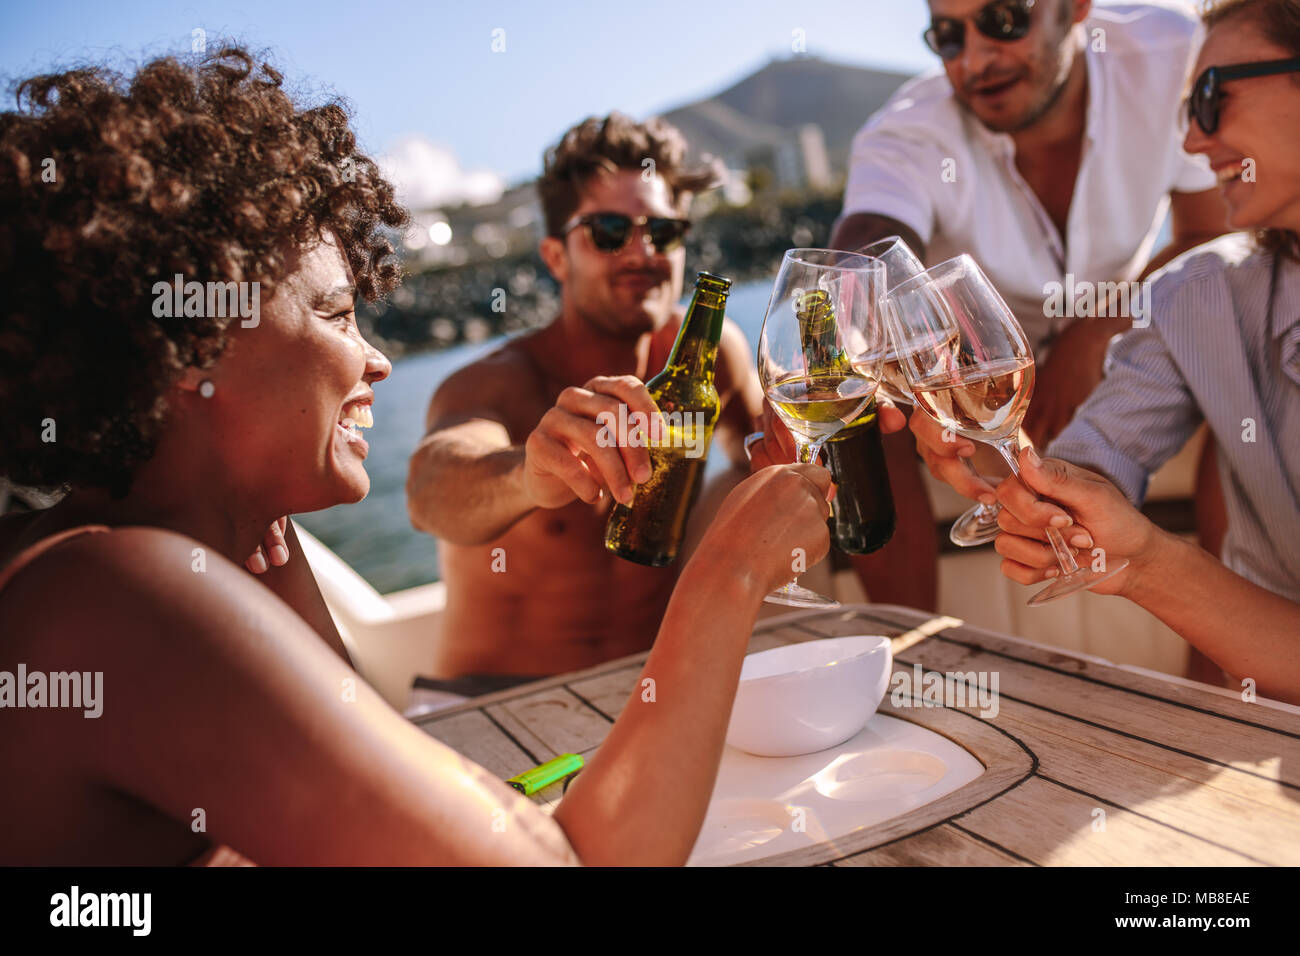 Multiracial group of people toasting drinks on boat. Young people enjoying at a boat party and having drinks. Stock Photo